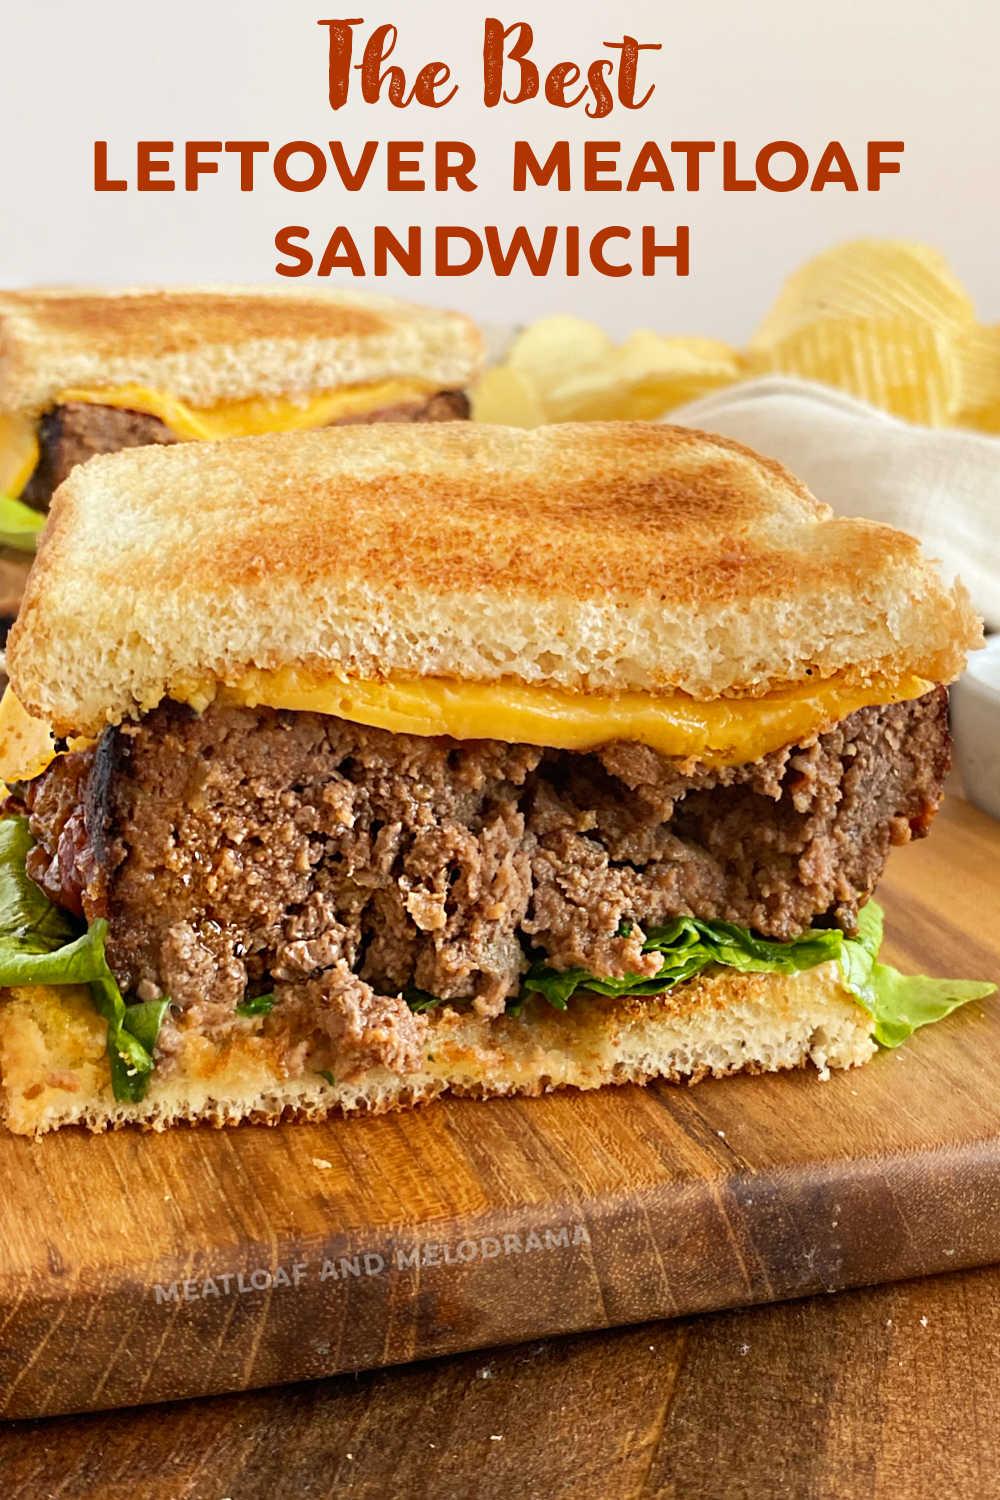 The Best Leftover Meatloaf Sandwich starts with a thick meatloaf slice served warm on toasted bread with a slice of cheese or 2 and your favorite toppings. This hot sandwich is perfect for a quick lunch or easy dinner. via @meamel